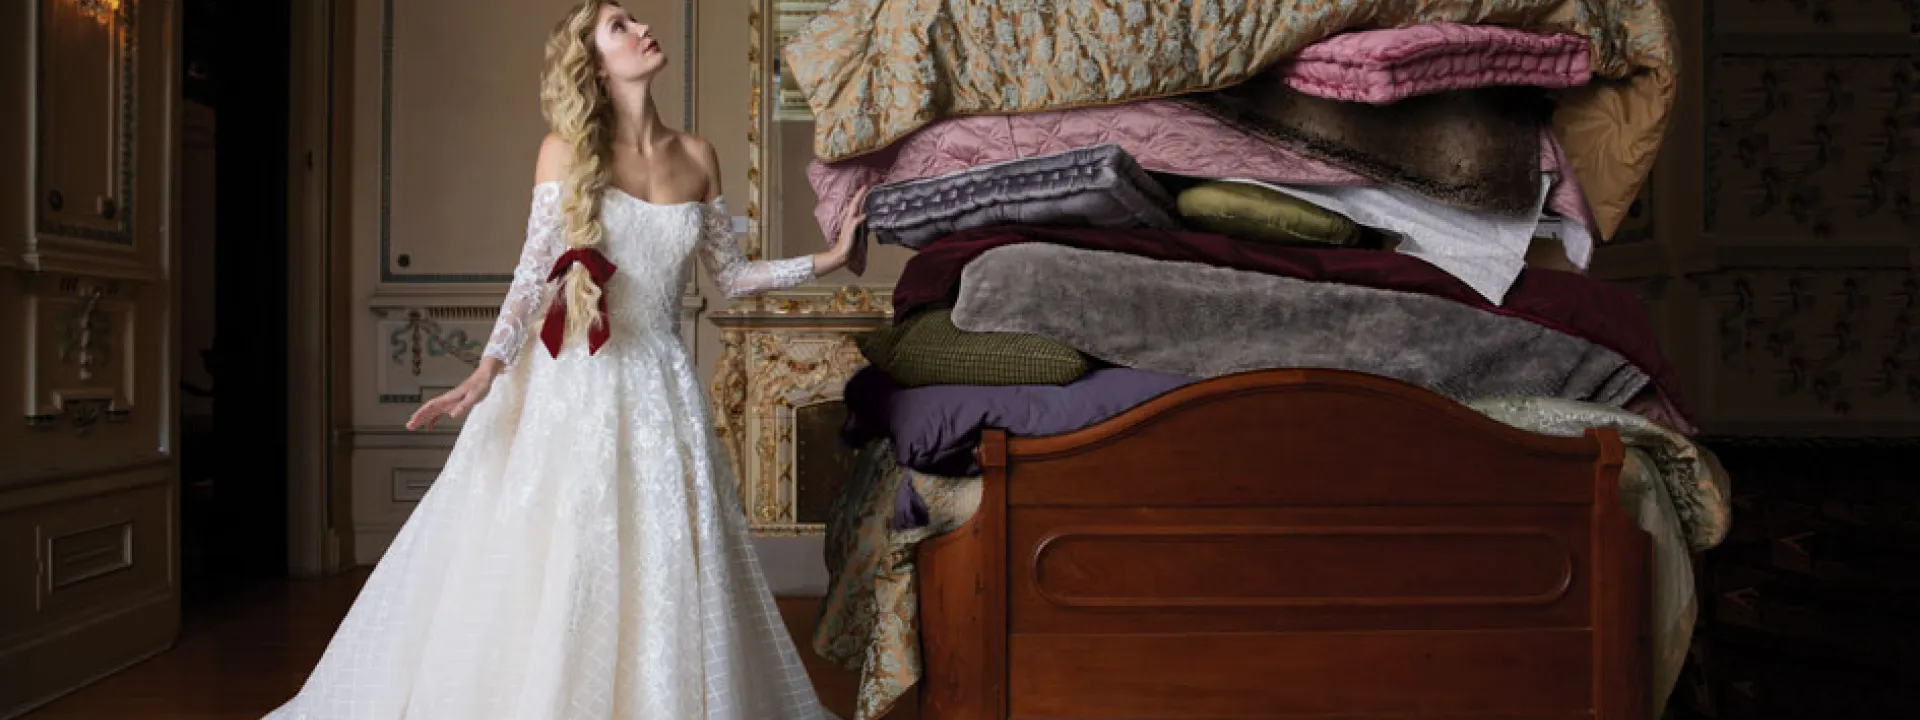 In "Princess and the Pea" style, the bride, in a lacy off-the-shoulder gown, contemplates a bed piled high with mattresses.